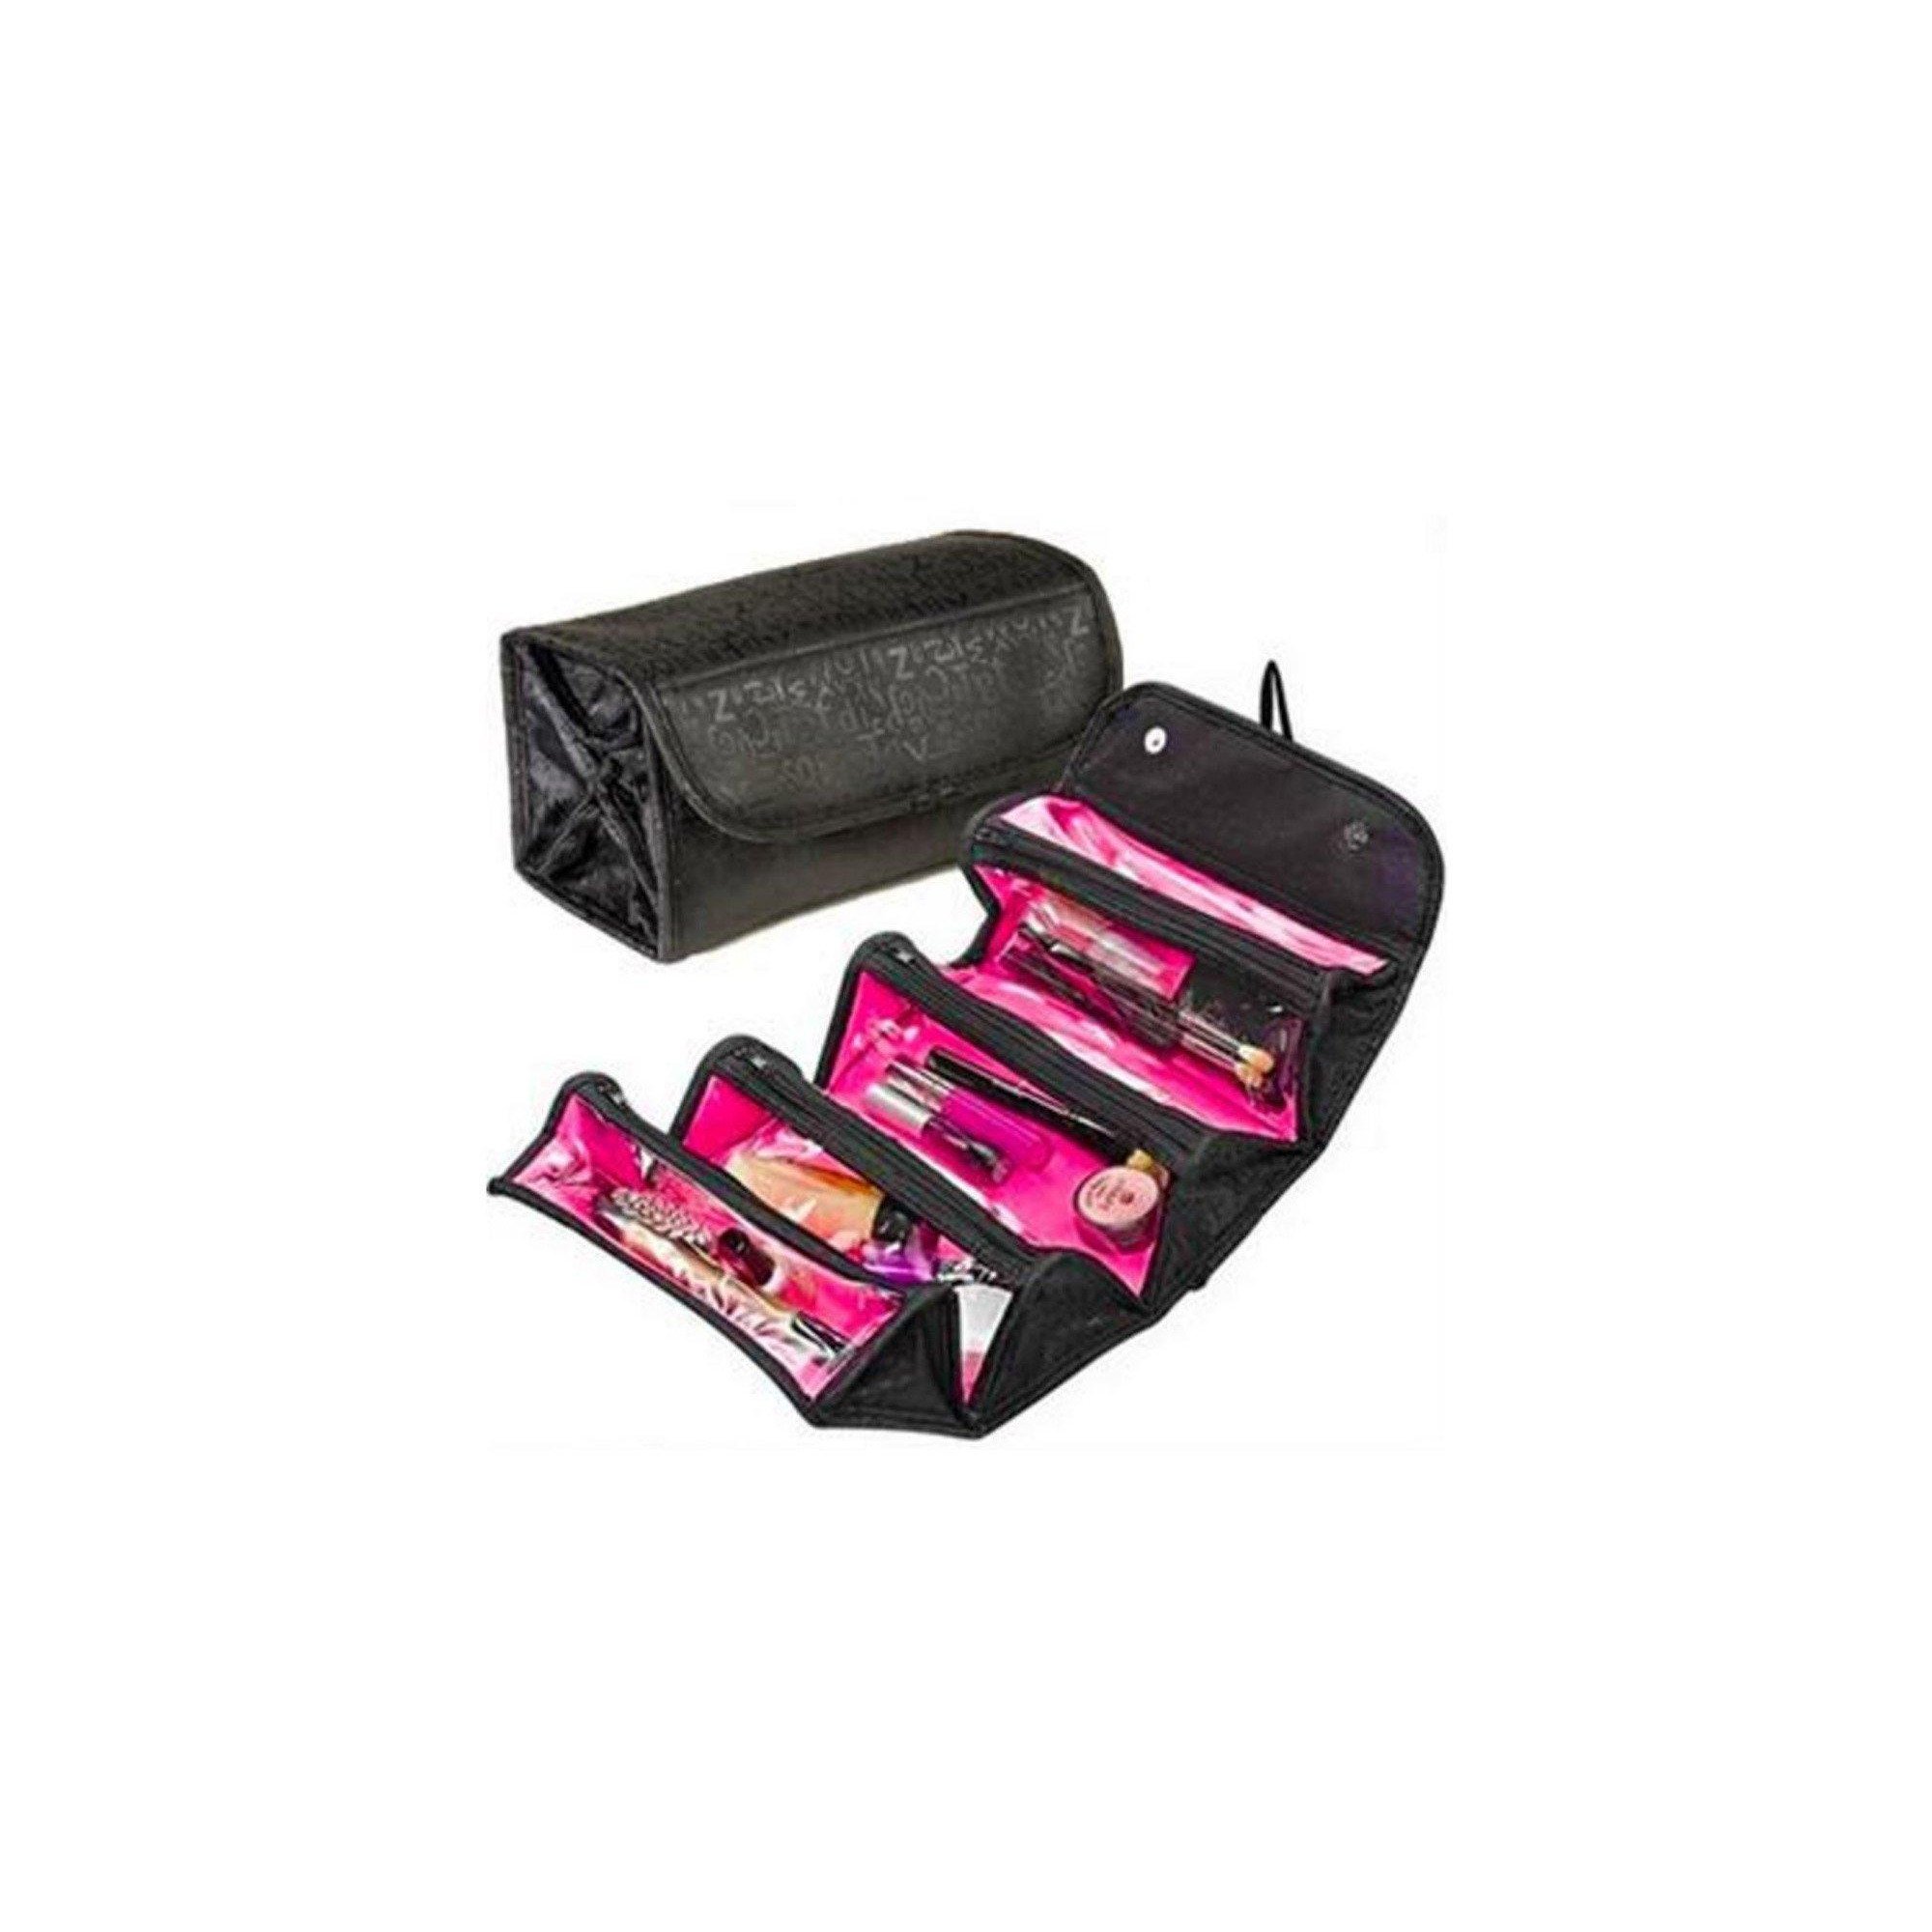 Triangle Travel Cosmetic Make up Toiletry Case Wash Bag - image 1